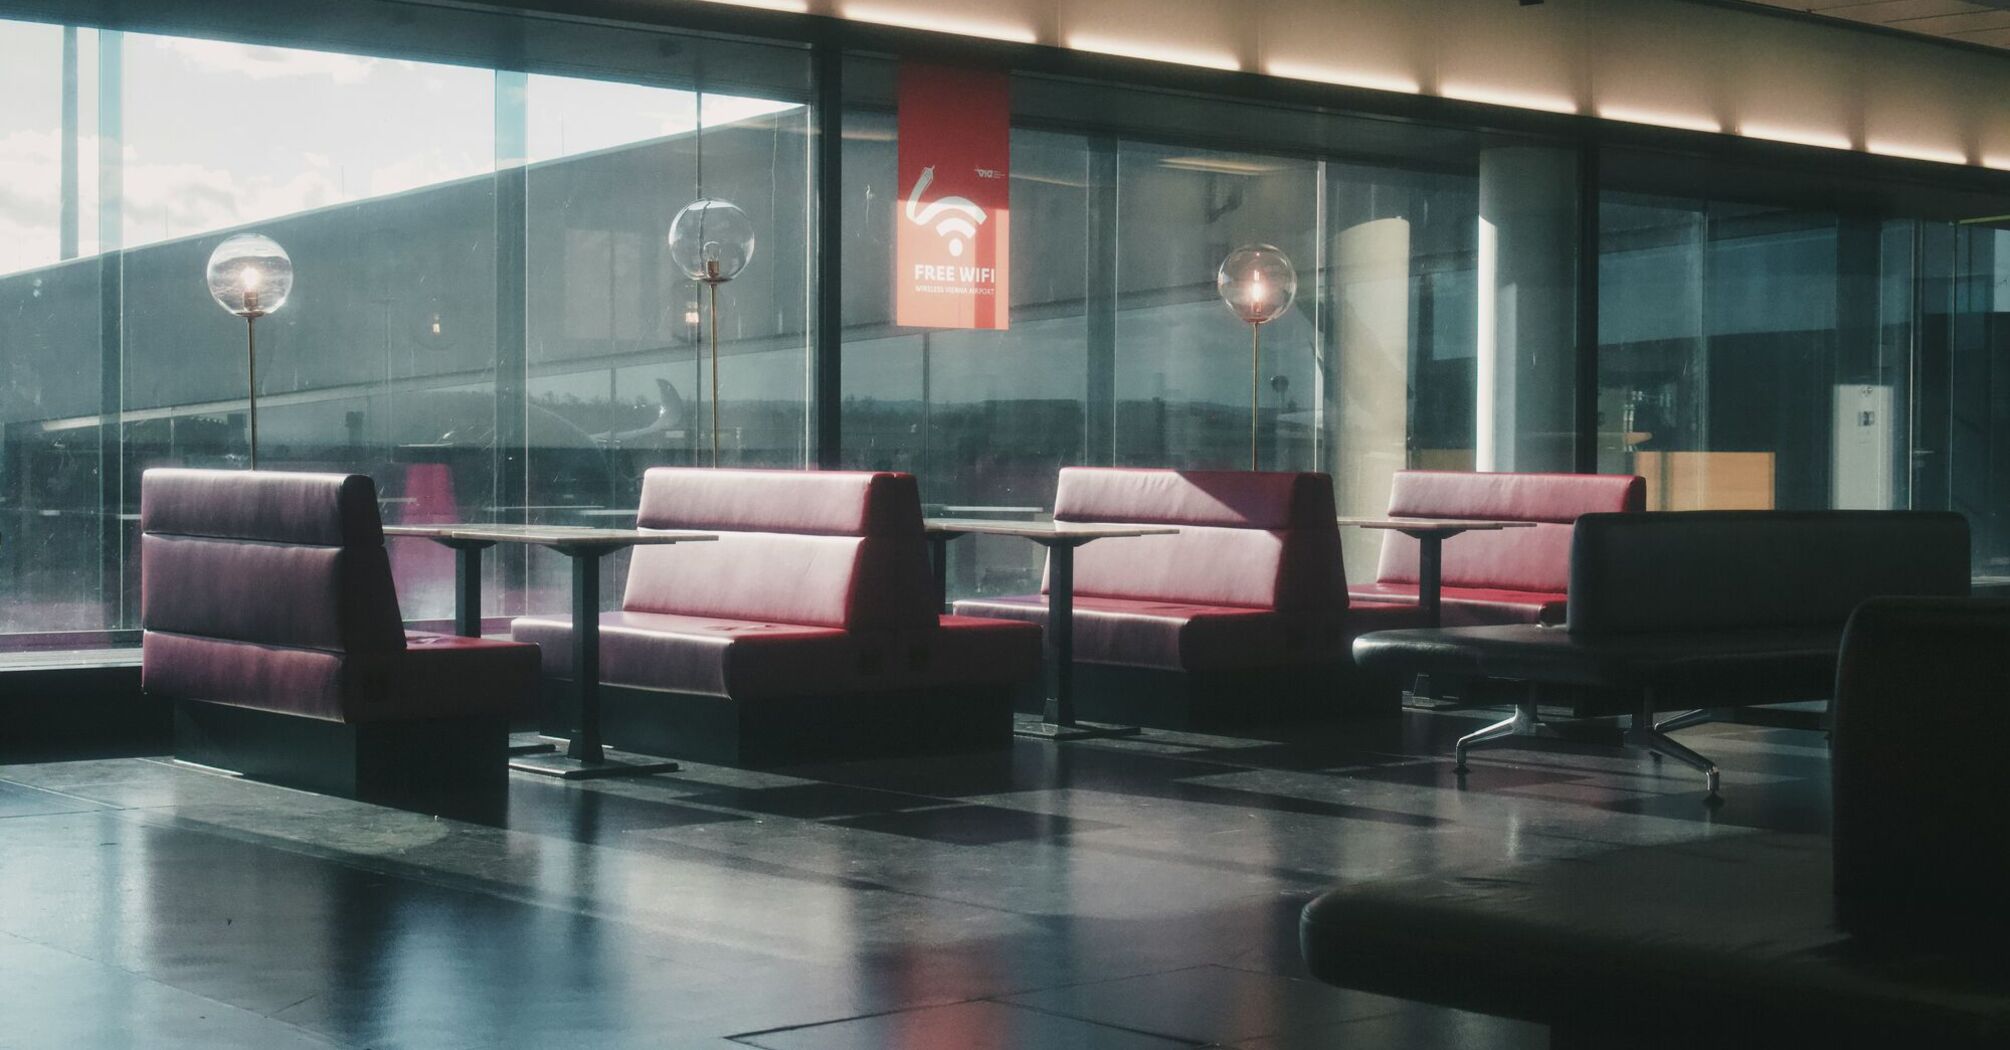 a waiting area with chairs and tables in front of large windows